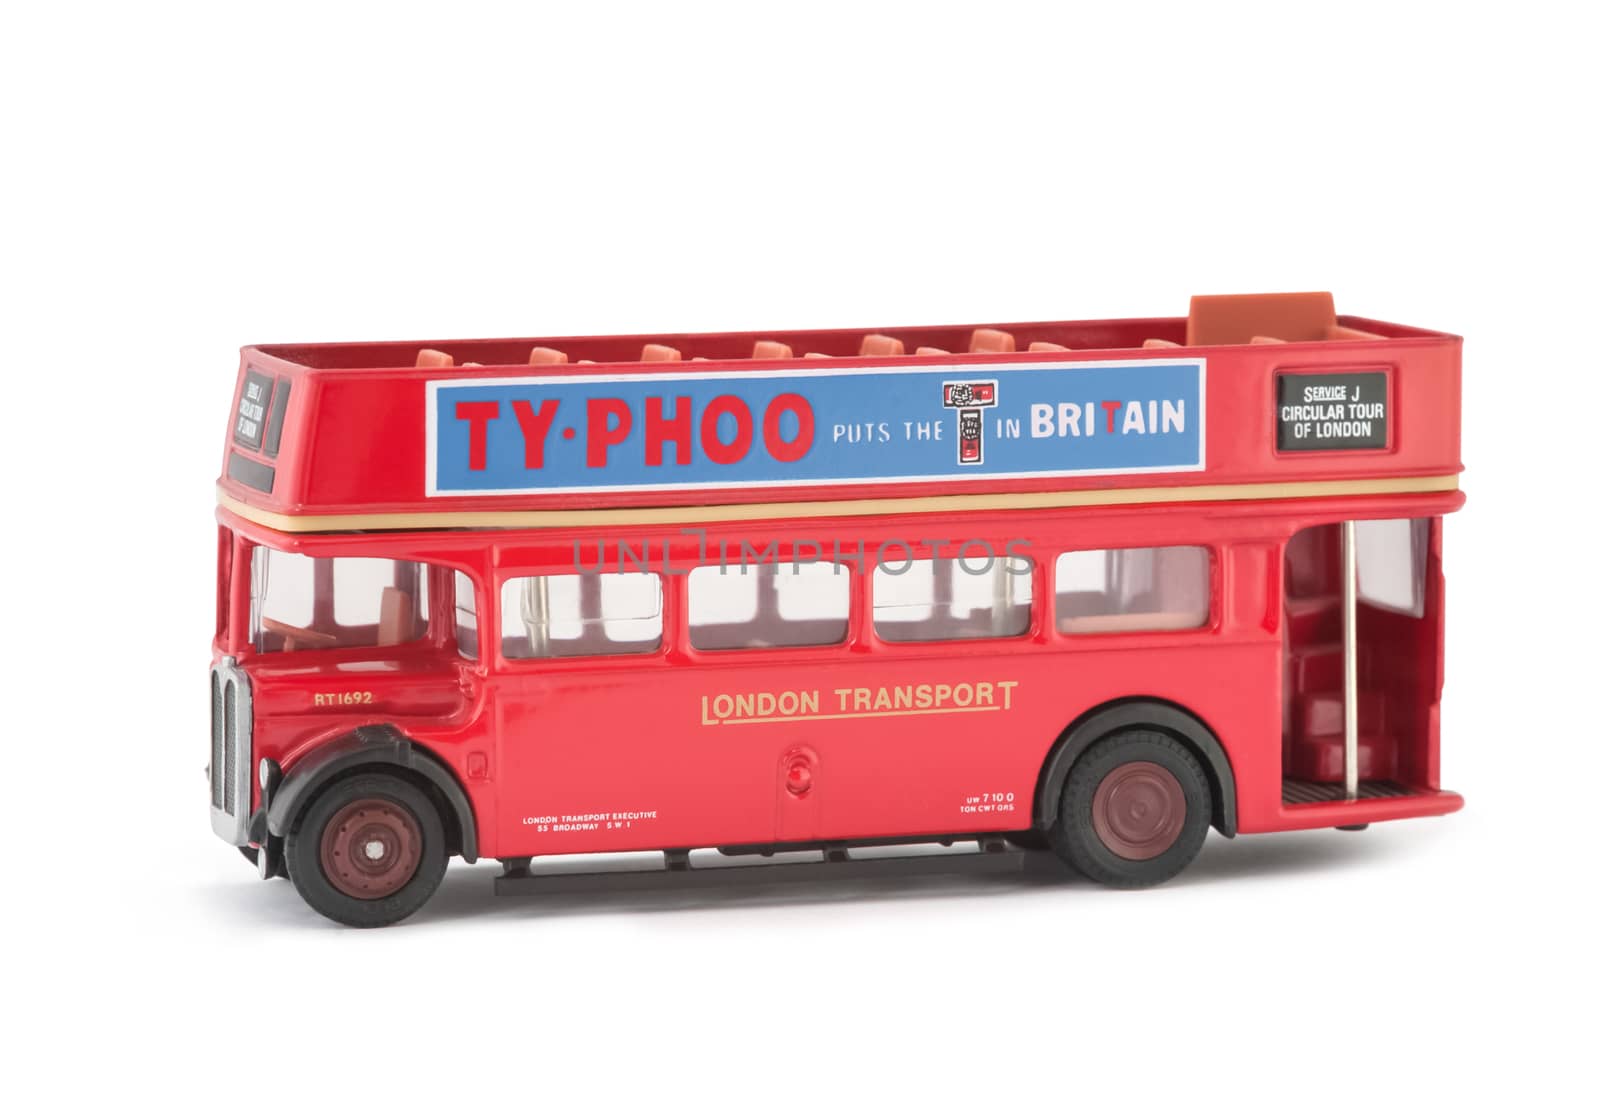 Miniature scale model of a vintage London City Tour open top sightseeing bus. The full size original was used for tourism trips around the UK capital city.